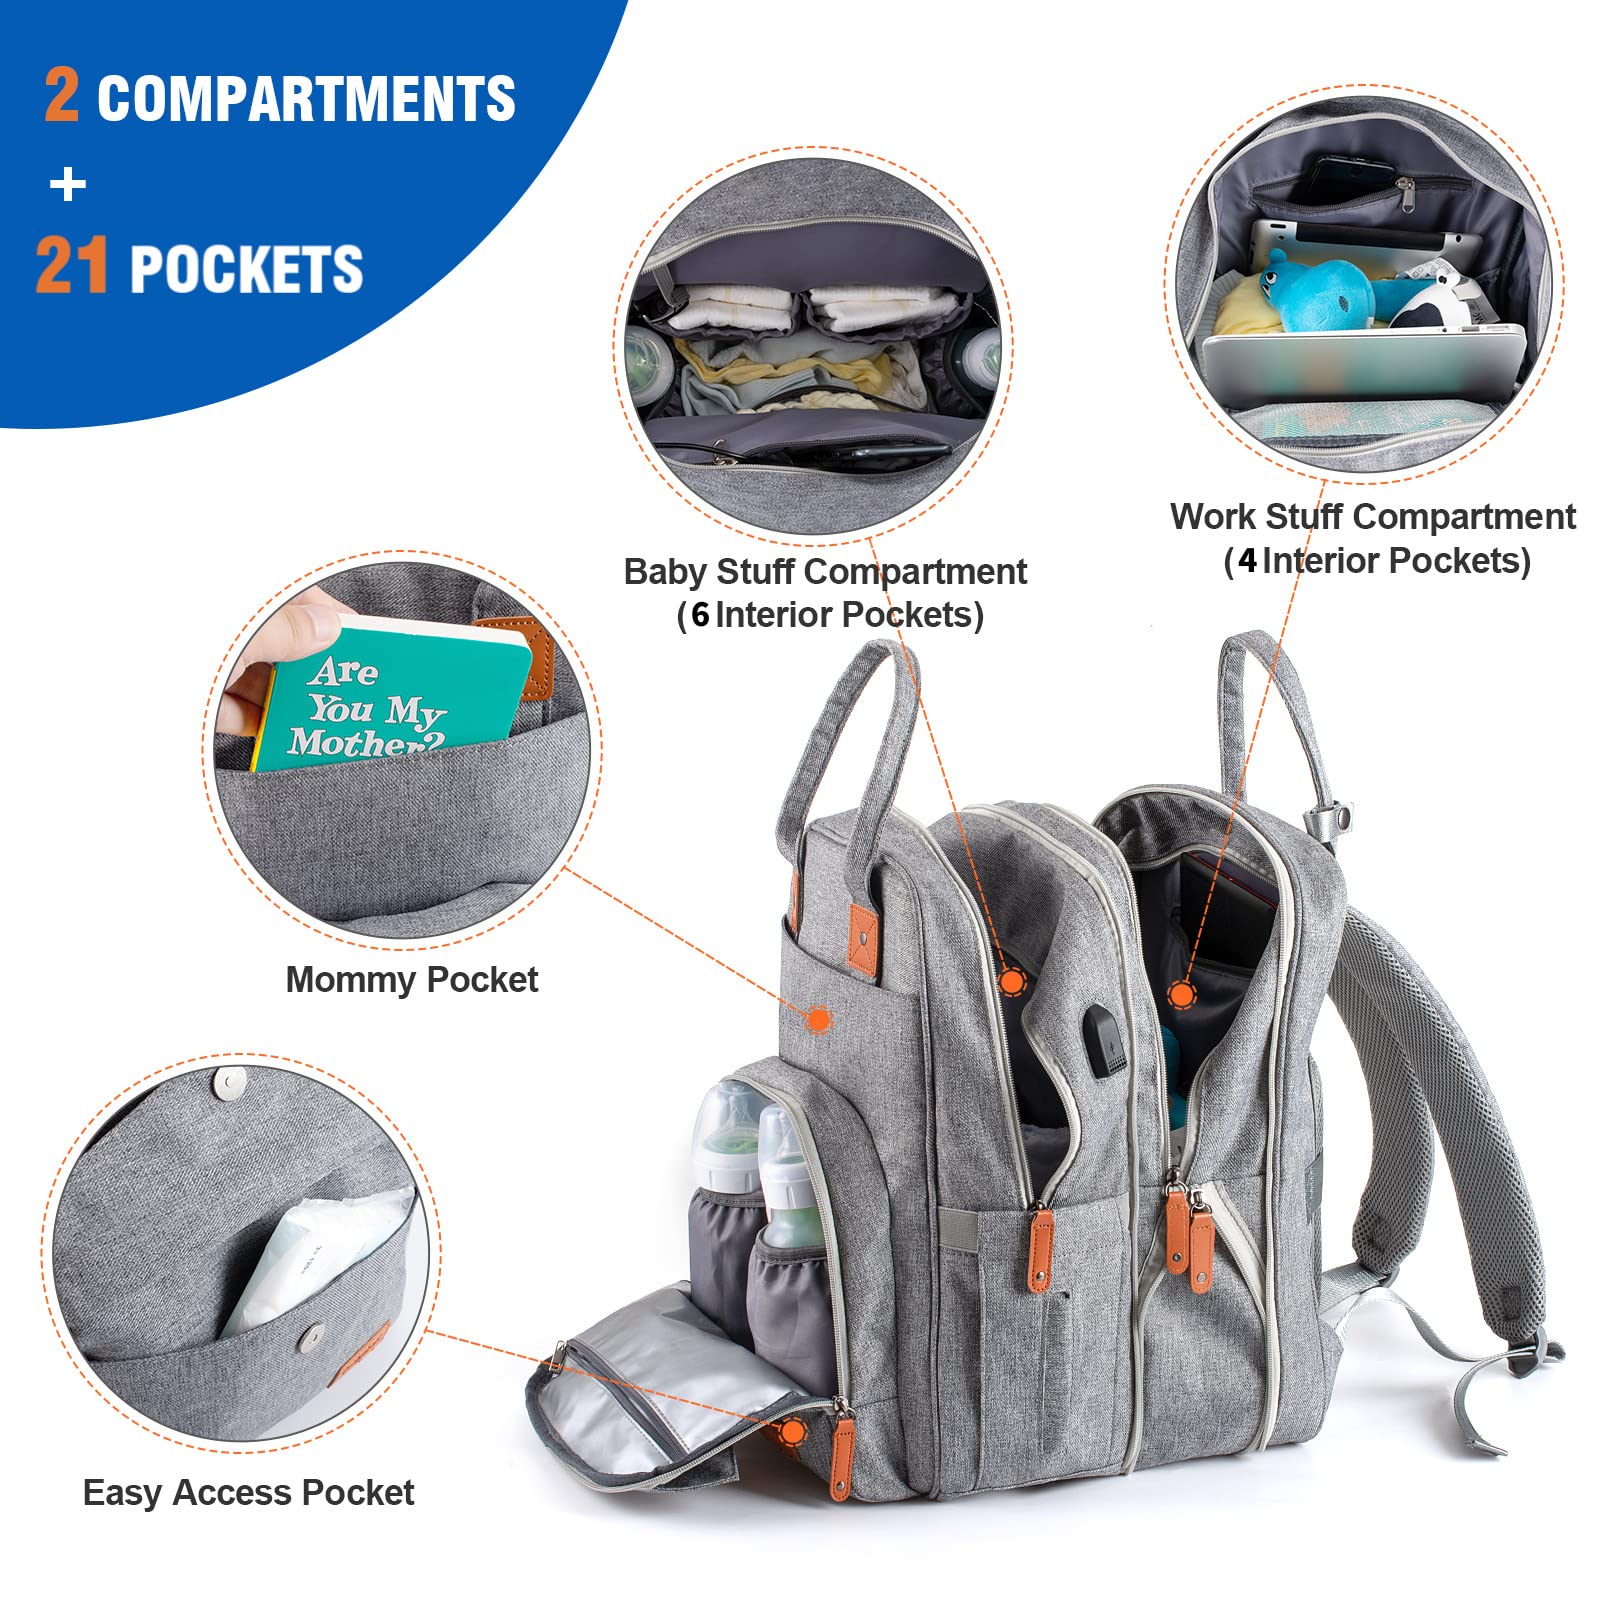 Extra Large Diaper Bag For 2 Kids, 35L Expandable Twin Diaper Bag Backpack For Travel/Shopping, Easy Access Design / 4 Big Insulated + 2 Wet Cloth Pocket For 2 Babies / Waterproof/Back Support Cushion